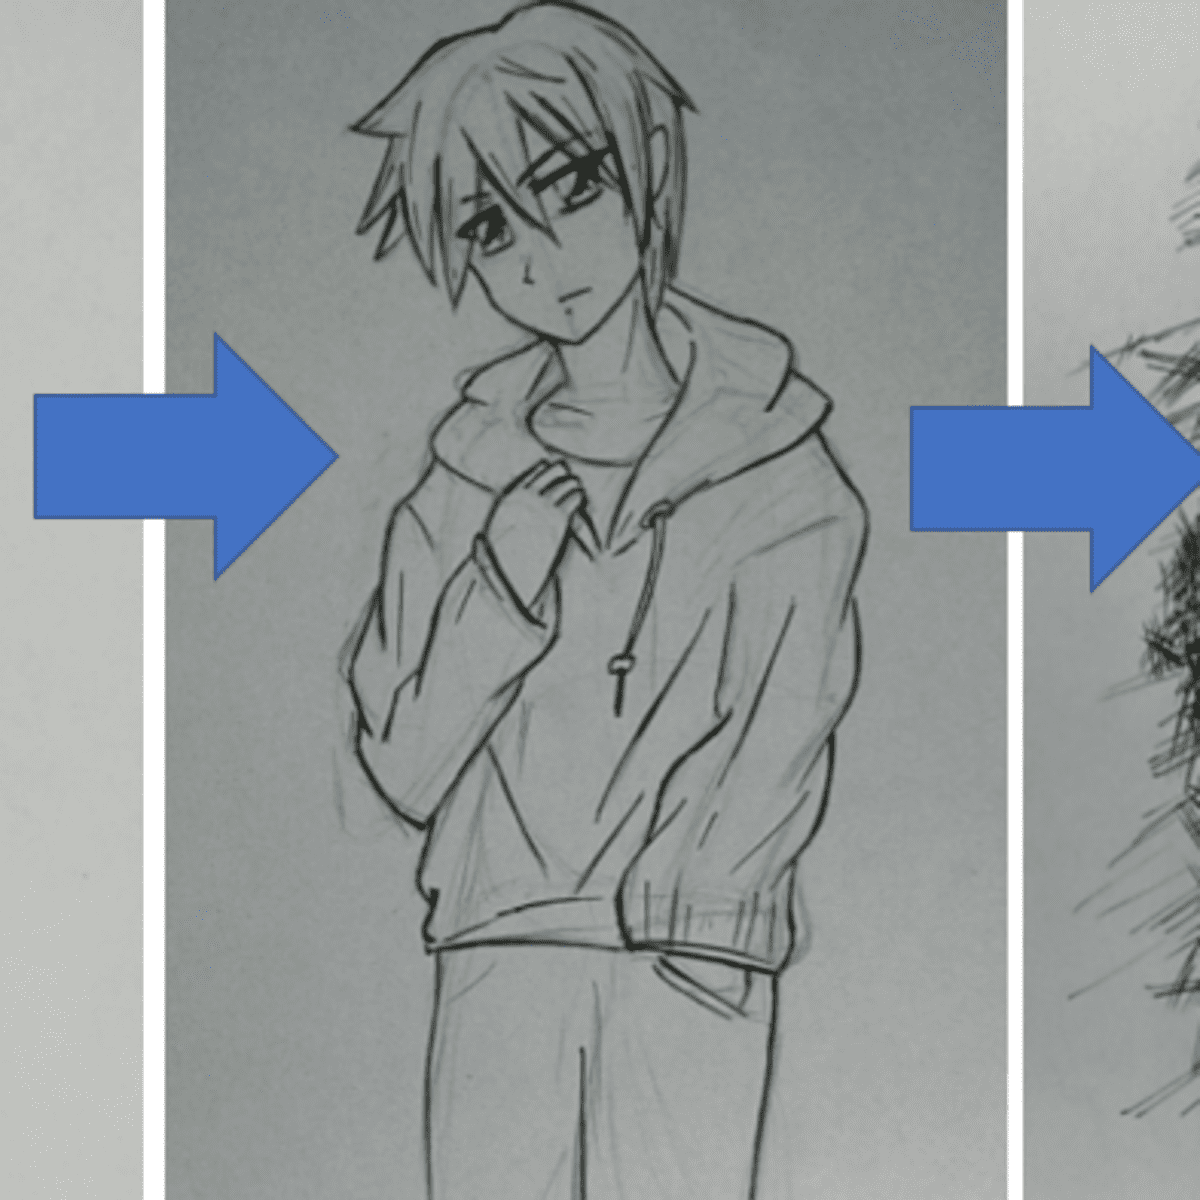 How to draw cute anime boy  Easy anime drawing  Easy drawing for  beginners  Pencil drawing easy  YouTube